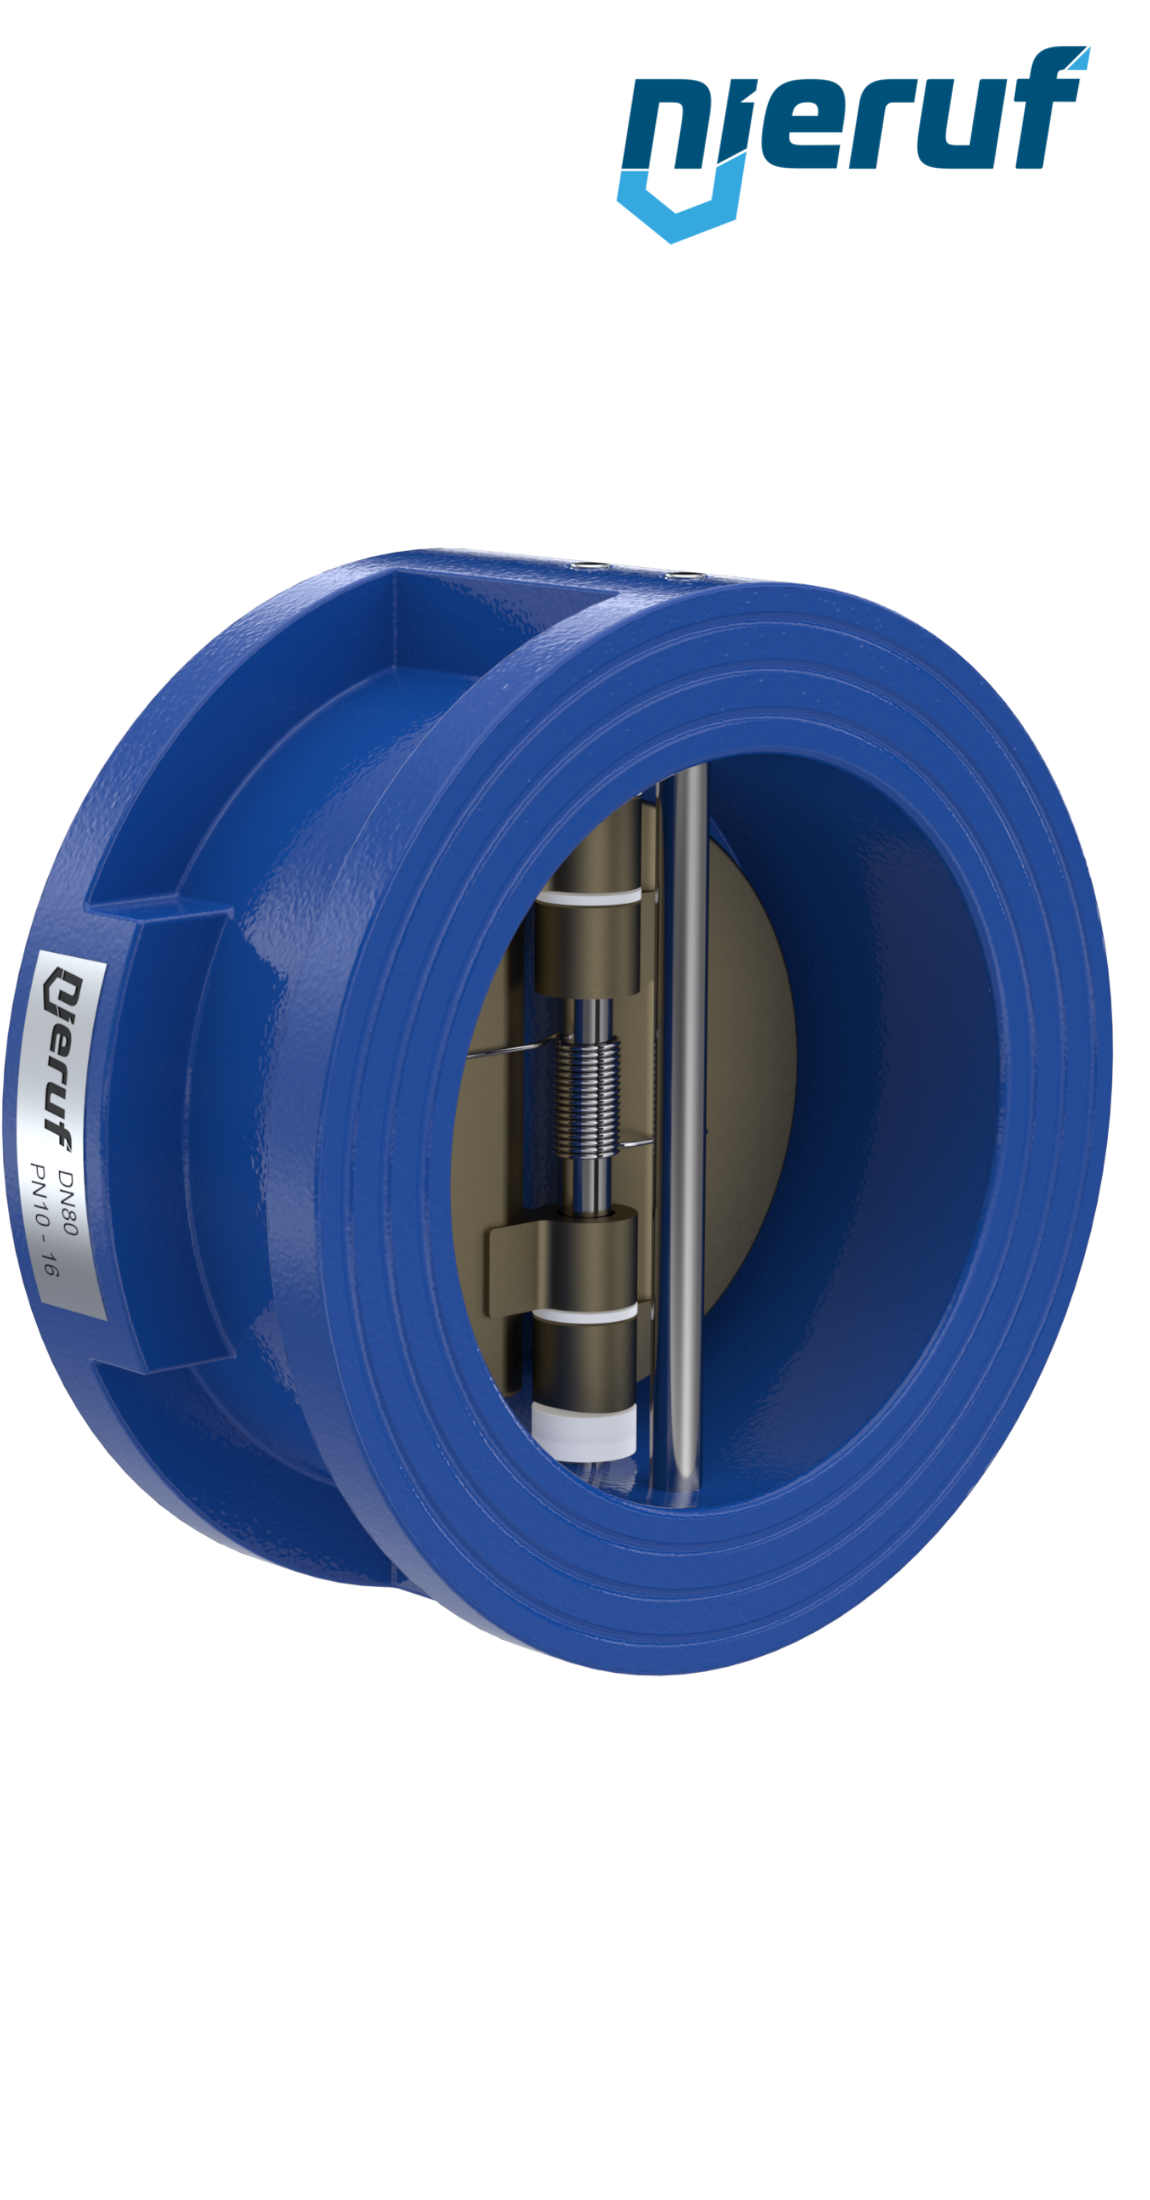 dual plate check valve DN80 DR04 GGG40 epoxyd plated blue 180µm FKM